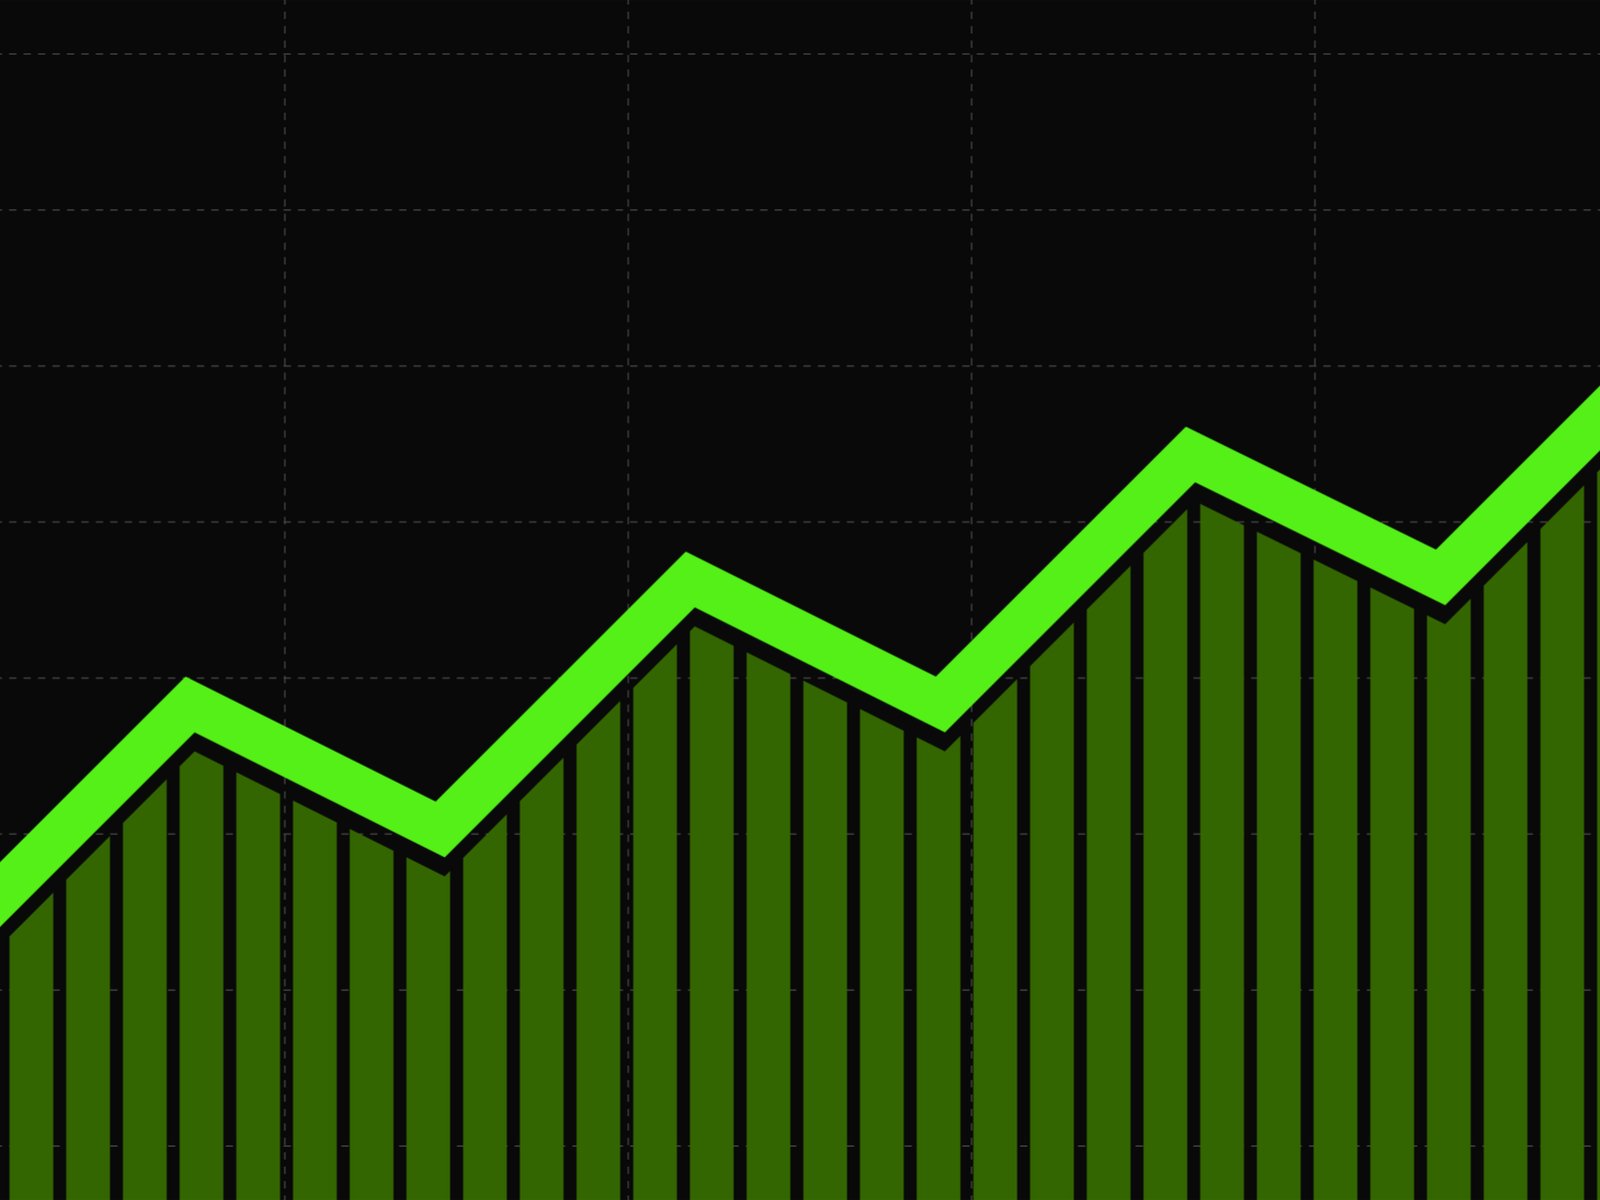 How to Easily Add Bitcoin Cash Price Charts to Your Website